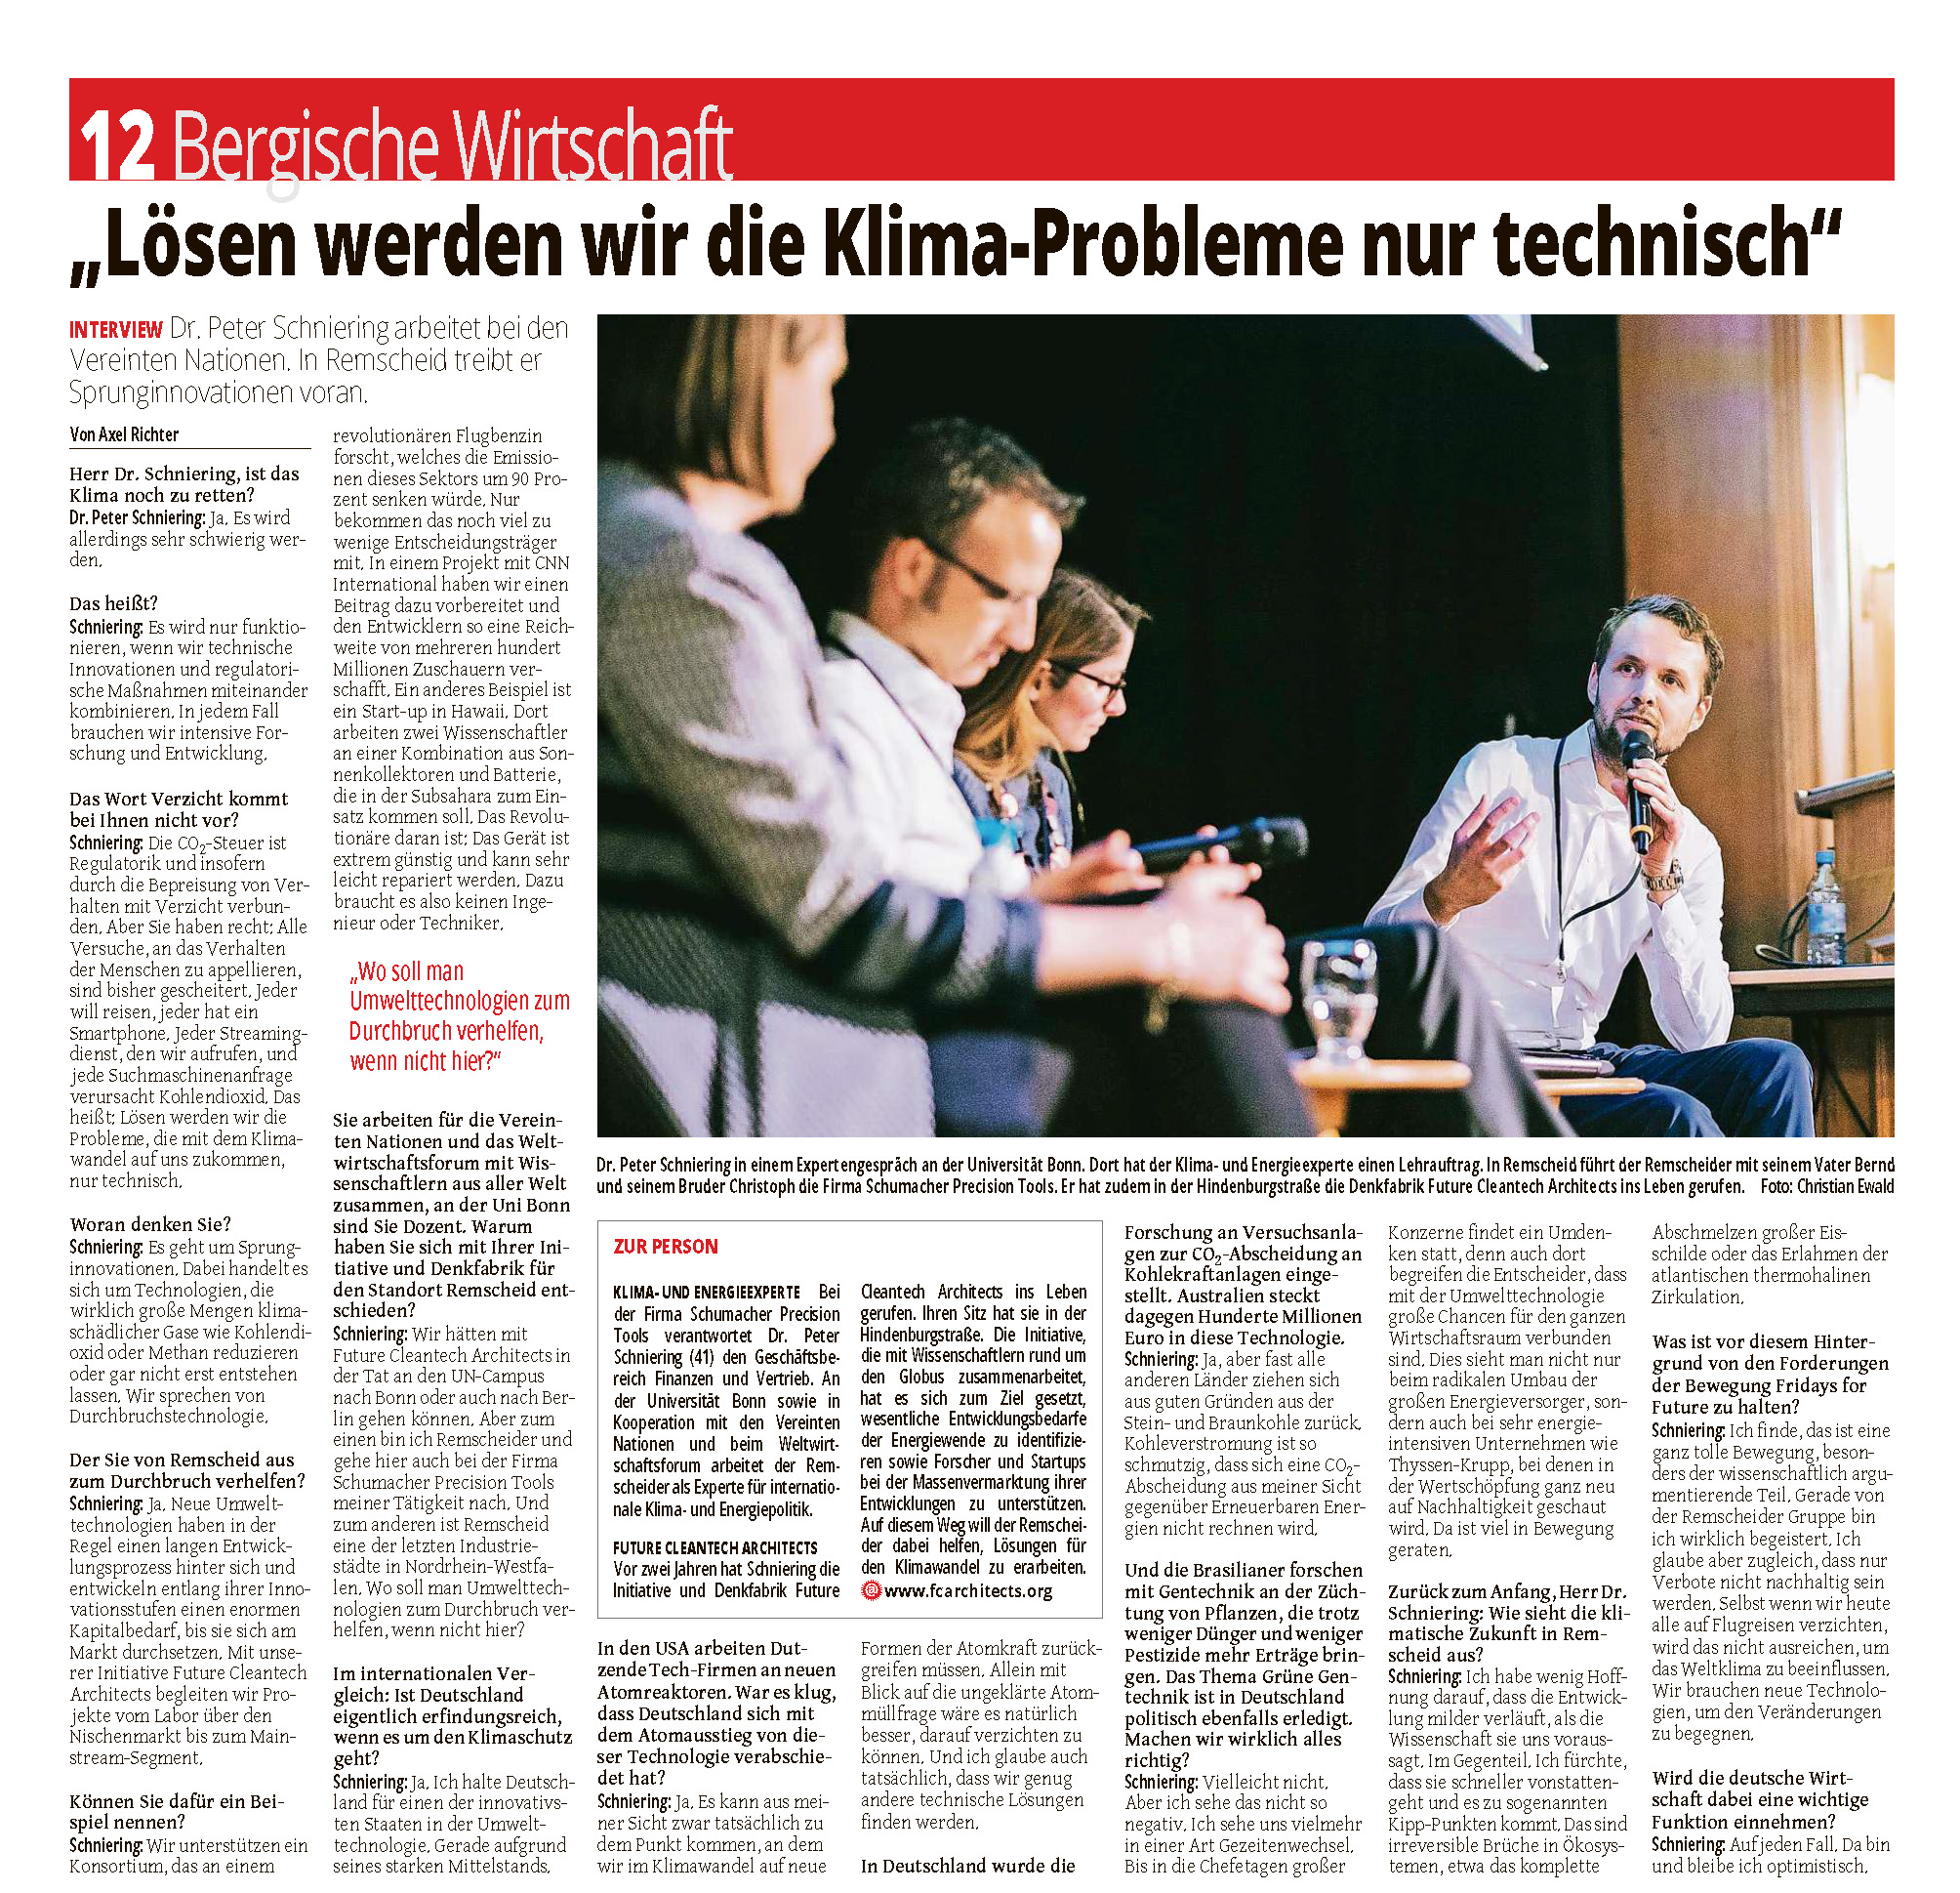 Interview with Dr. Peter Schniering for RGA Newspaper.